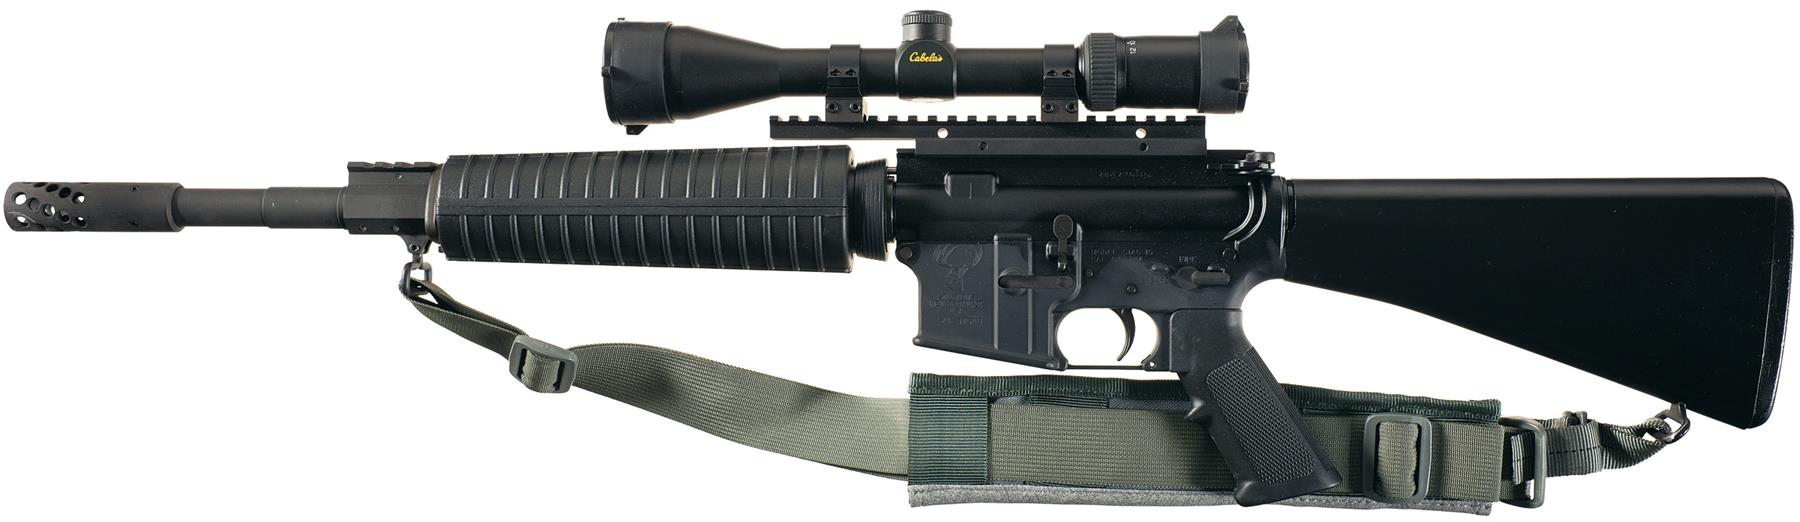 Arms 50 Beowulf Upper Receiver and ScopeBuilt using a Stag Arms lower and a...